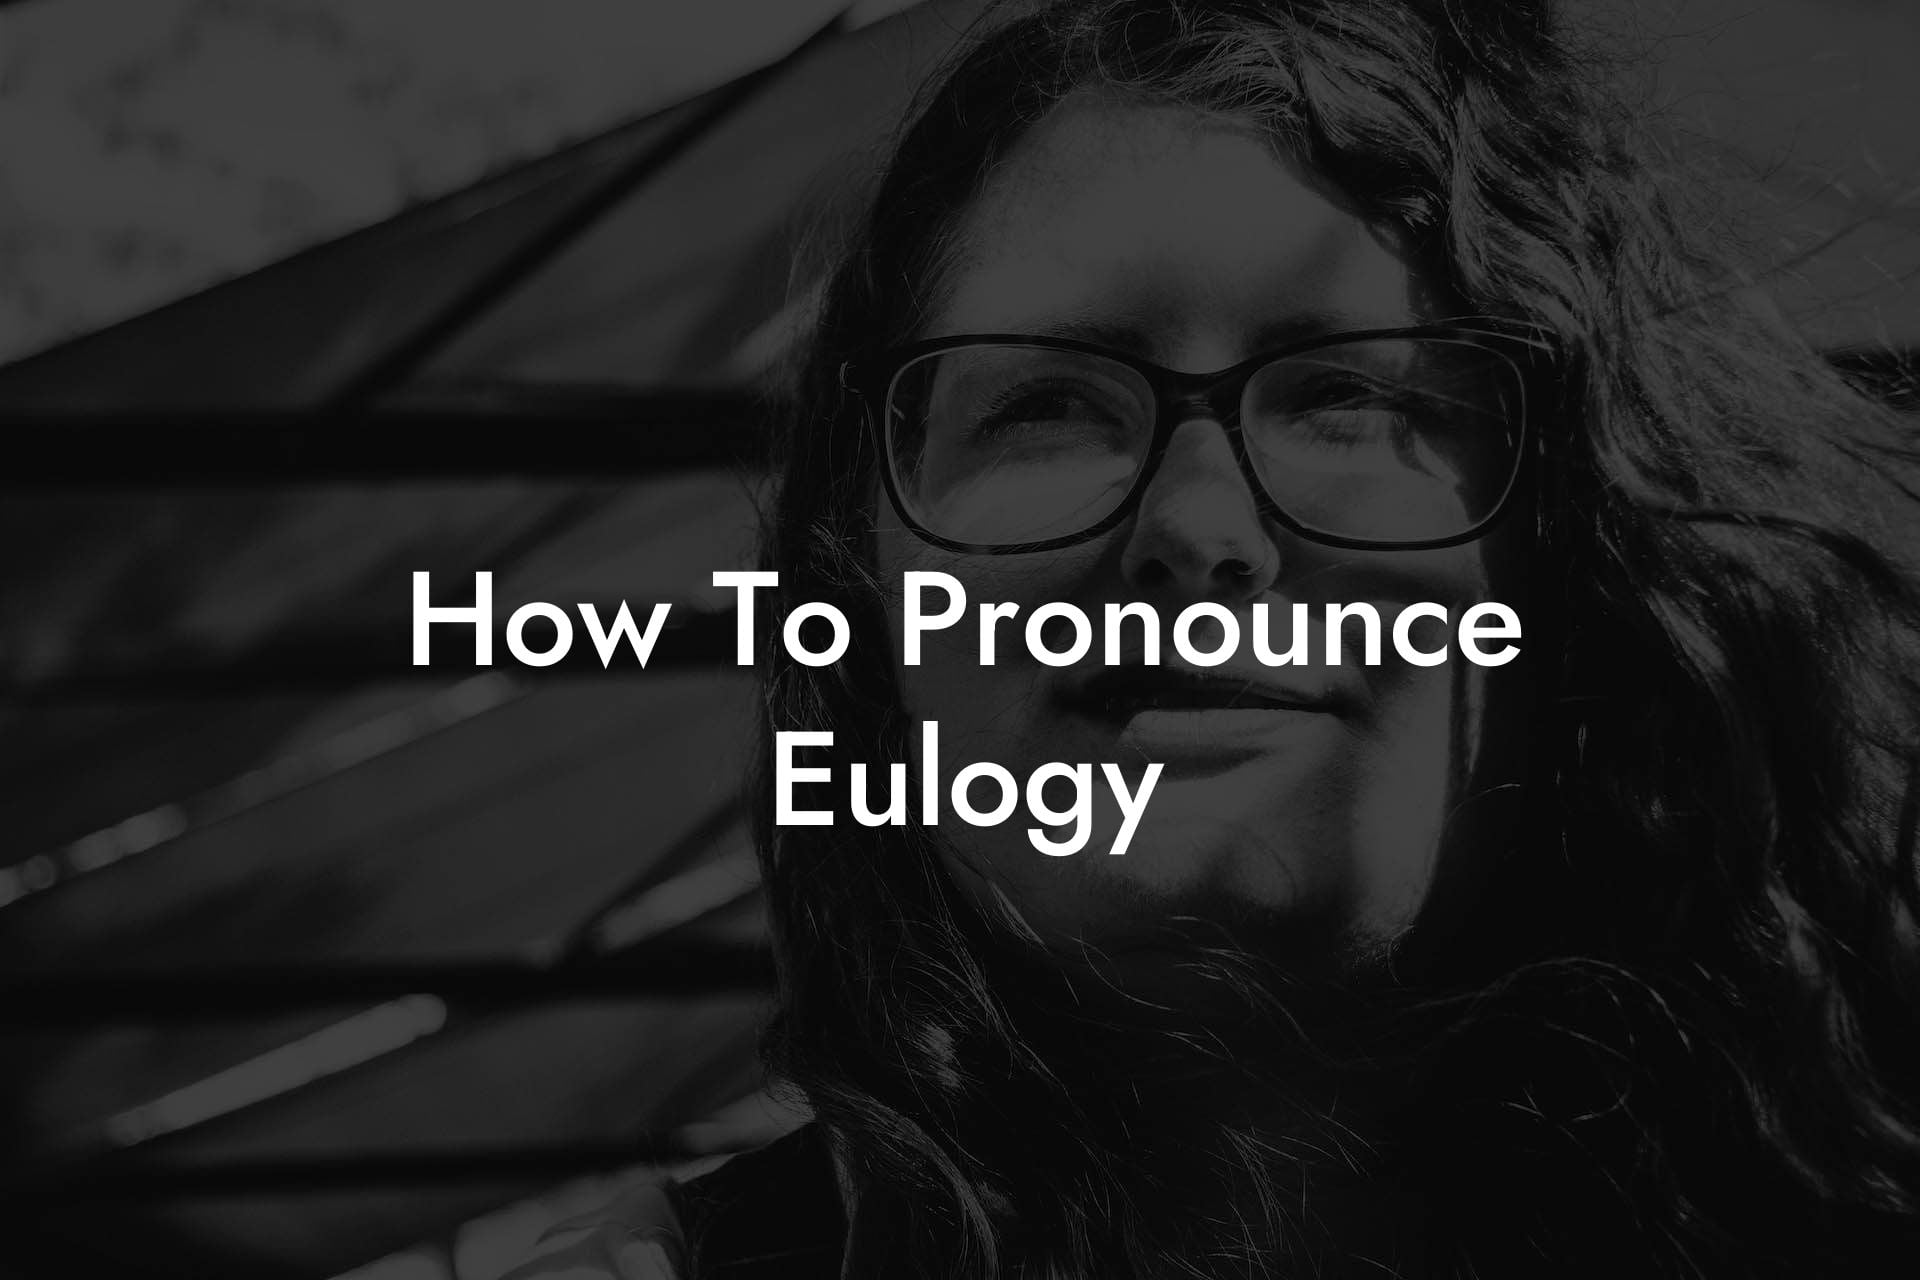 How To Pronounce Eulogy